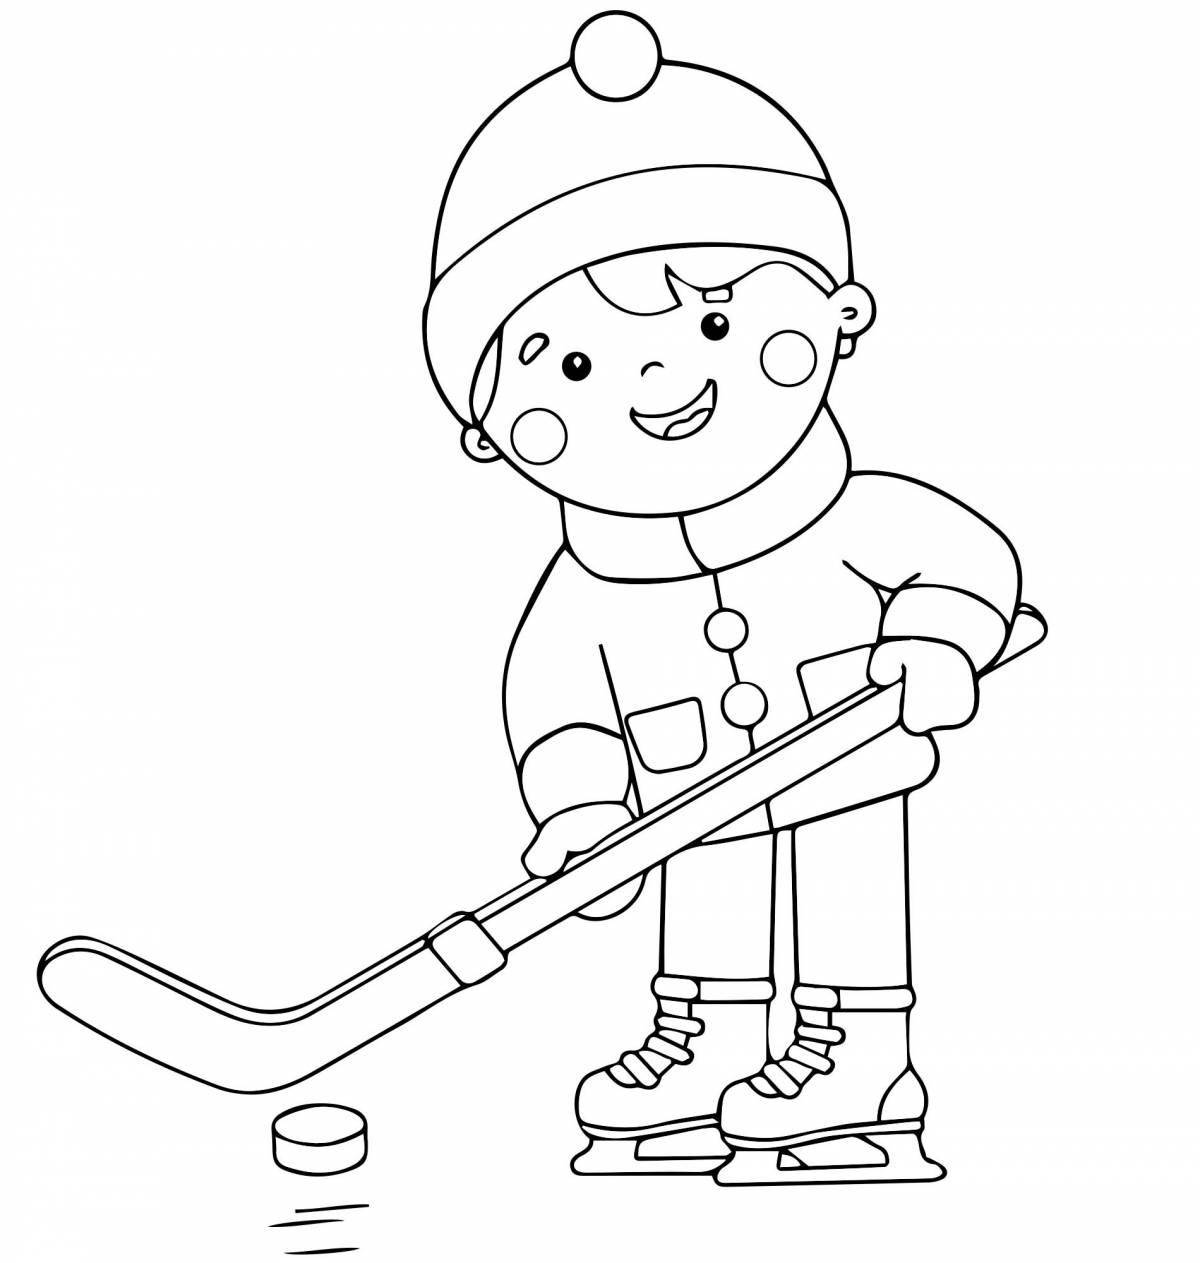 Glorious winter sports coloring page for kids